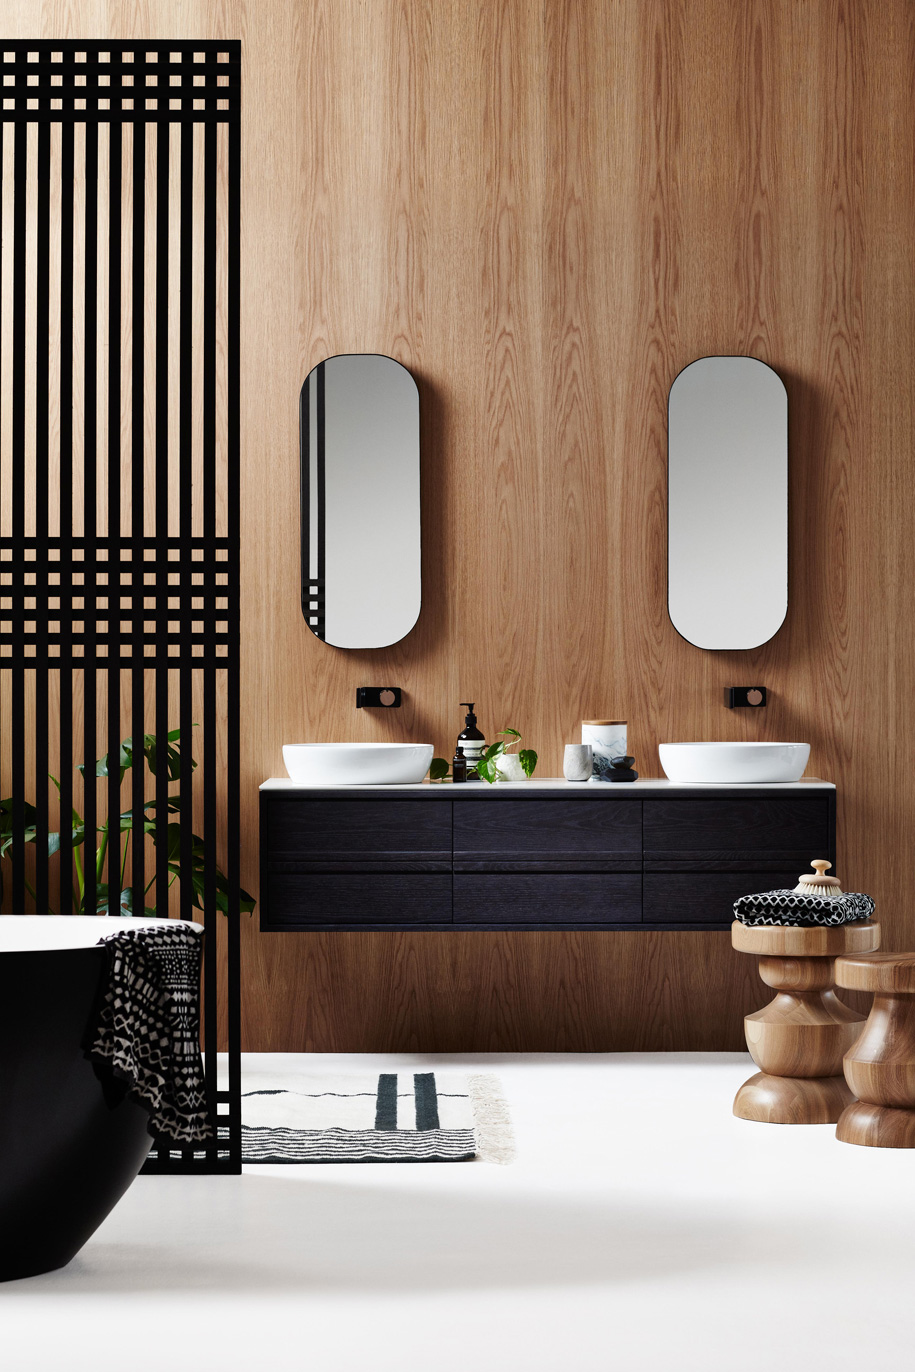 19159867_issy_z8_6_drawer_vanity_1500_and_issy_z1_oval_mirror_380_in_situ_front_view_cropped